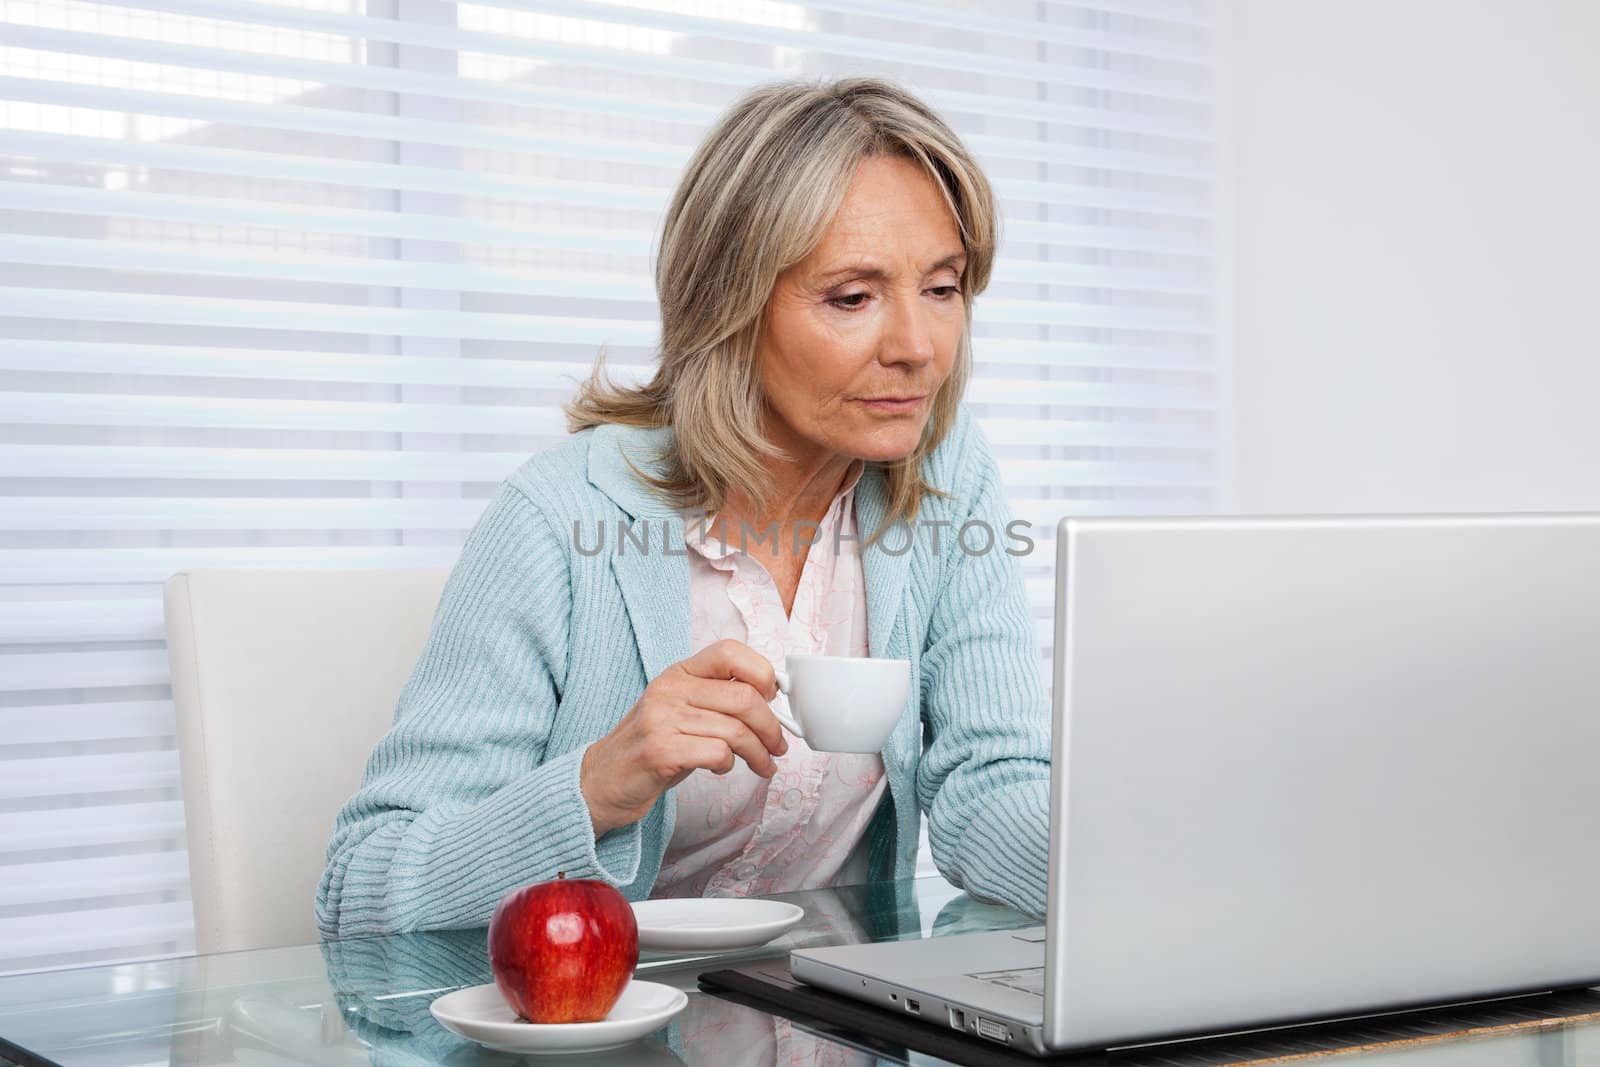 Mature woman working on laptop while holding cup of tea